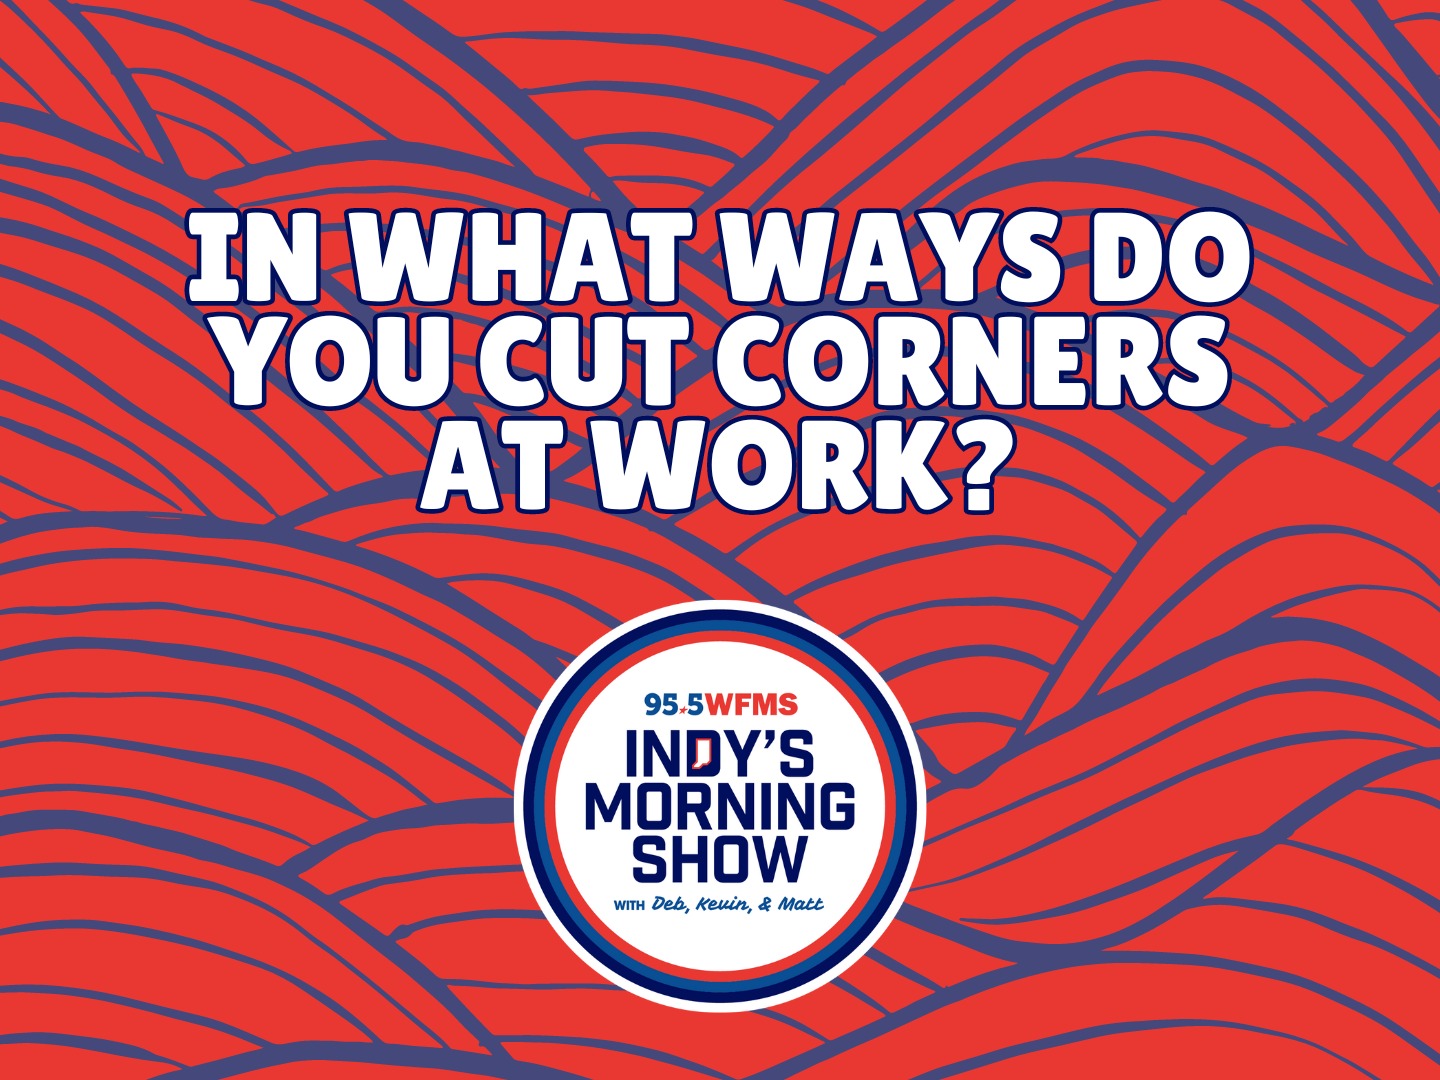 How Do You Cut Corners At Work?